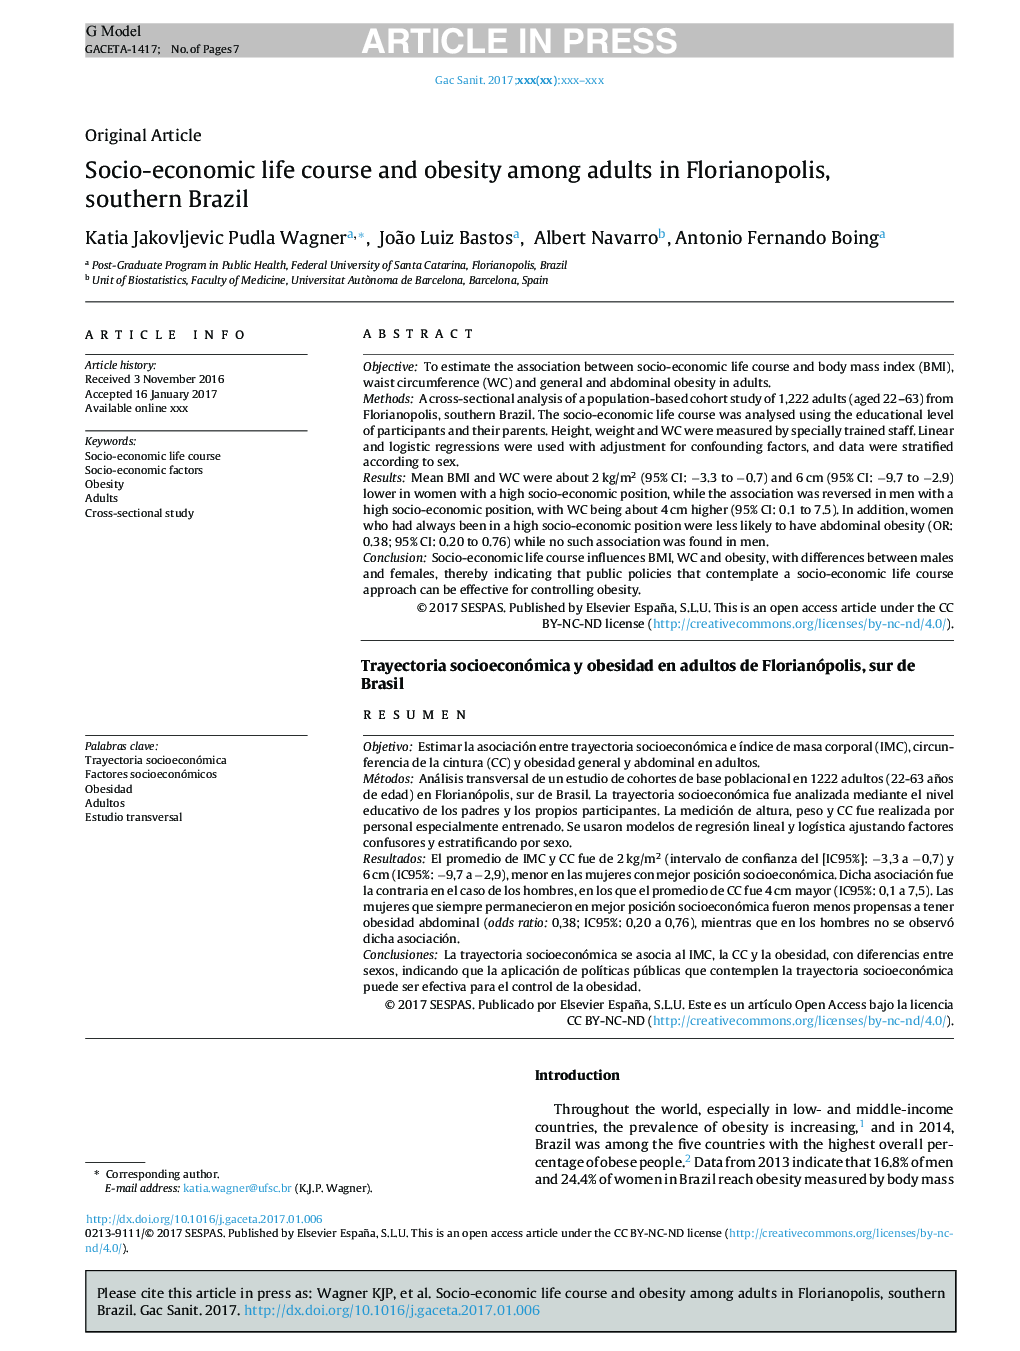 Socio-economic life course and obesity among adults in Florianopolis, southern Brazil